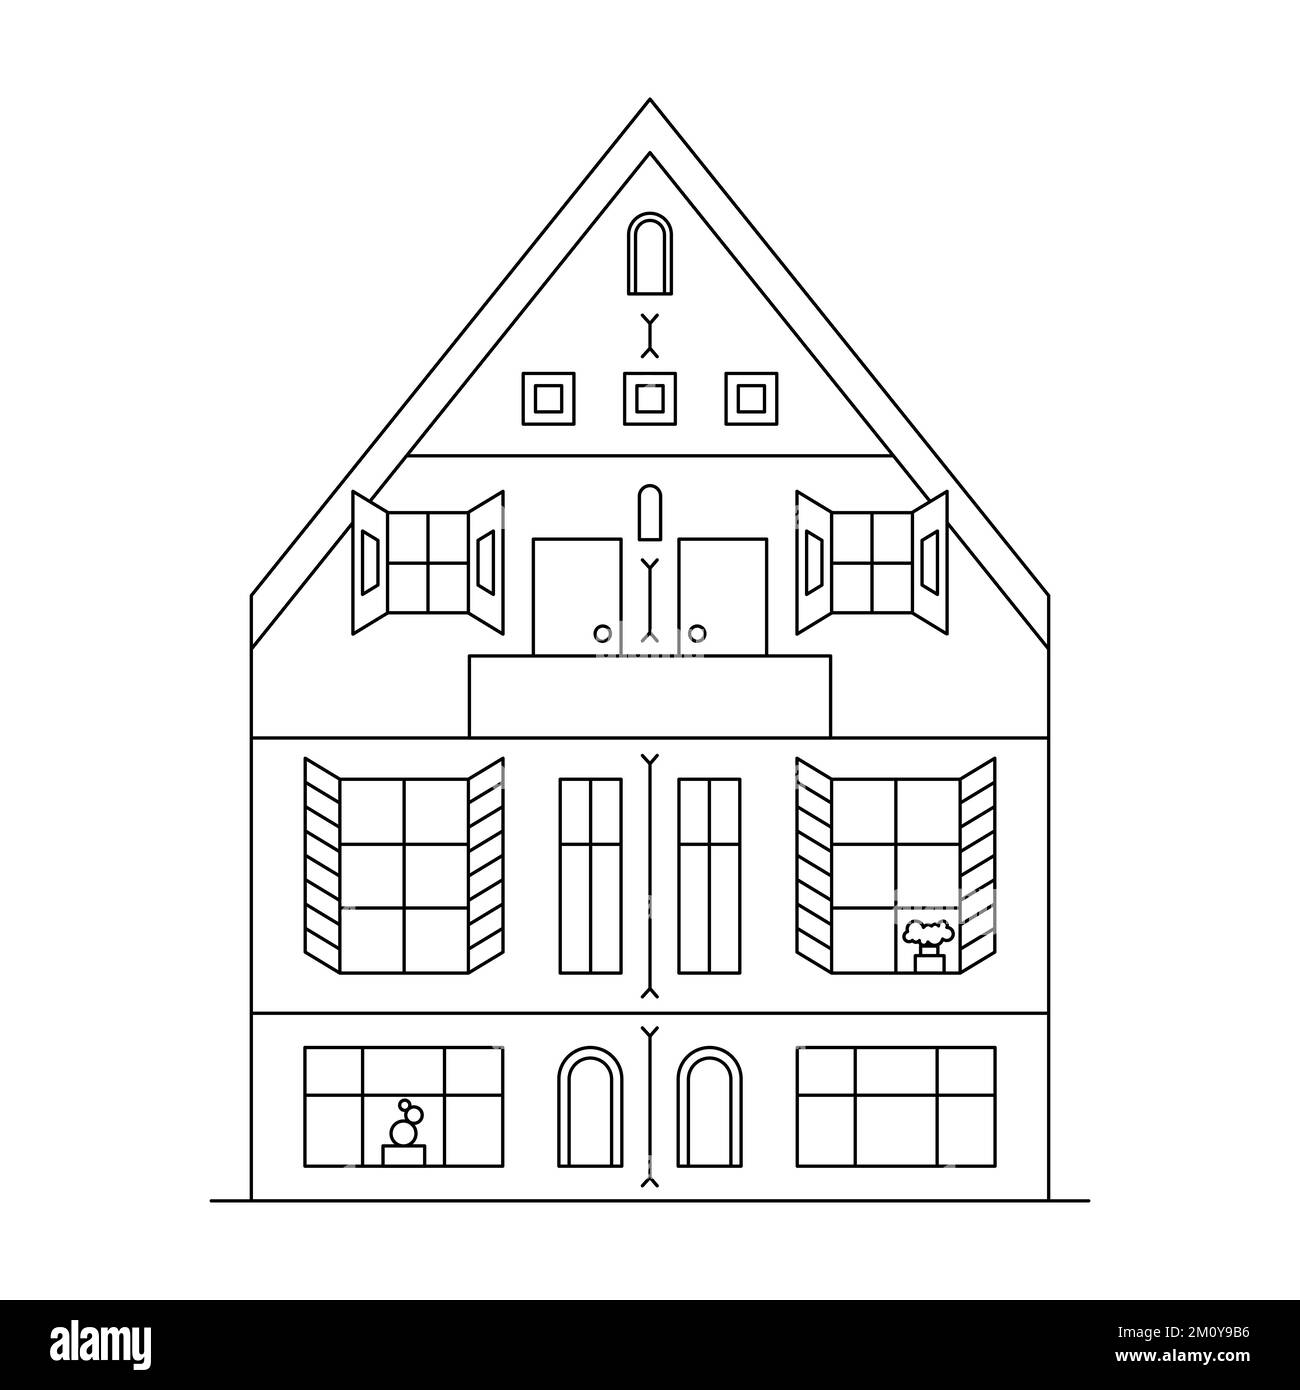 Line art vector neighborhood illustration with one house. Cityscape with black residential building. Stock Vector